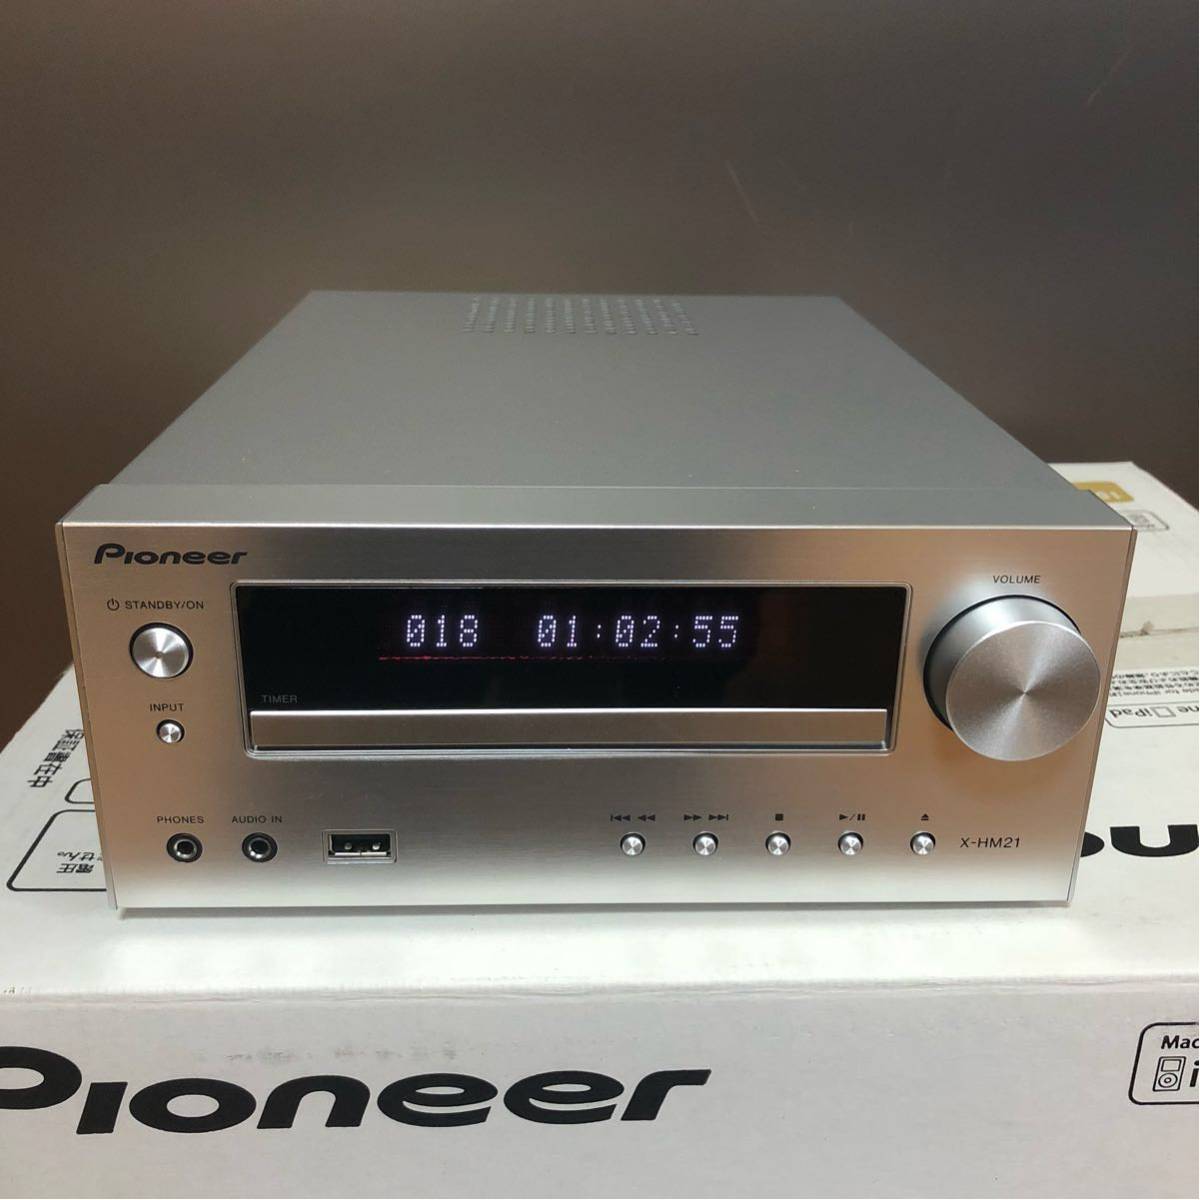 Pioneer Pioneer CD Mini component system X-HM21-S: Real Yahoo 